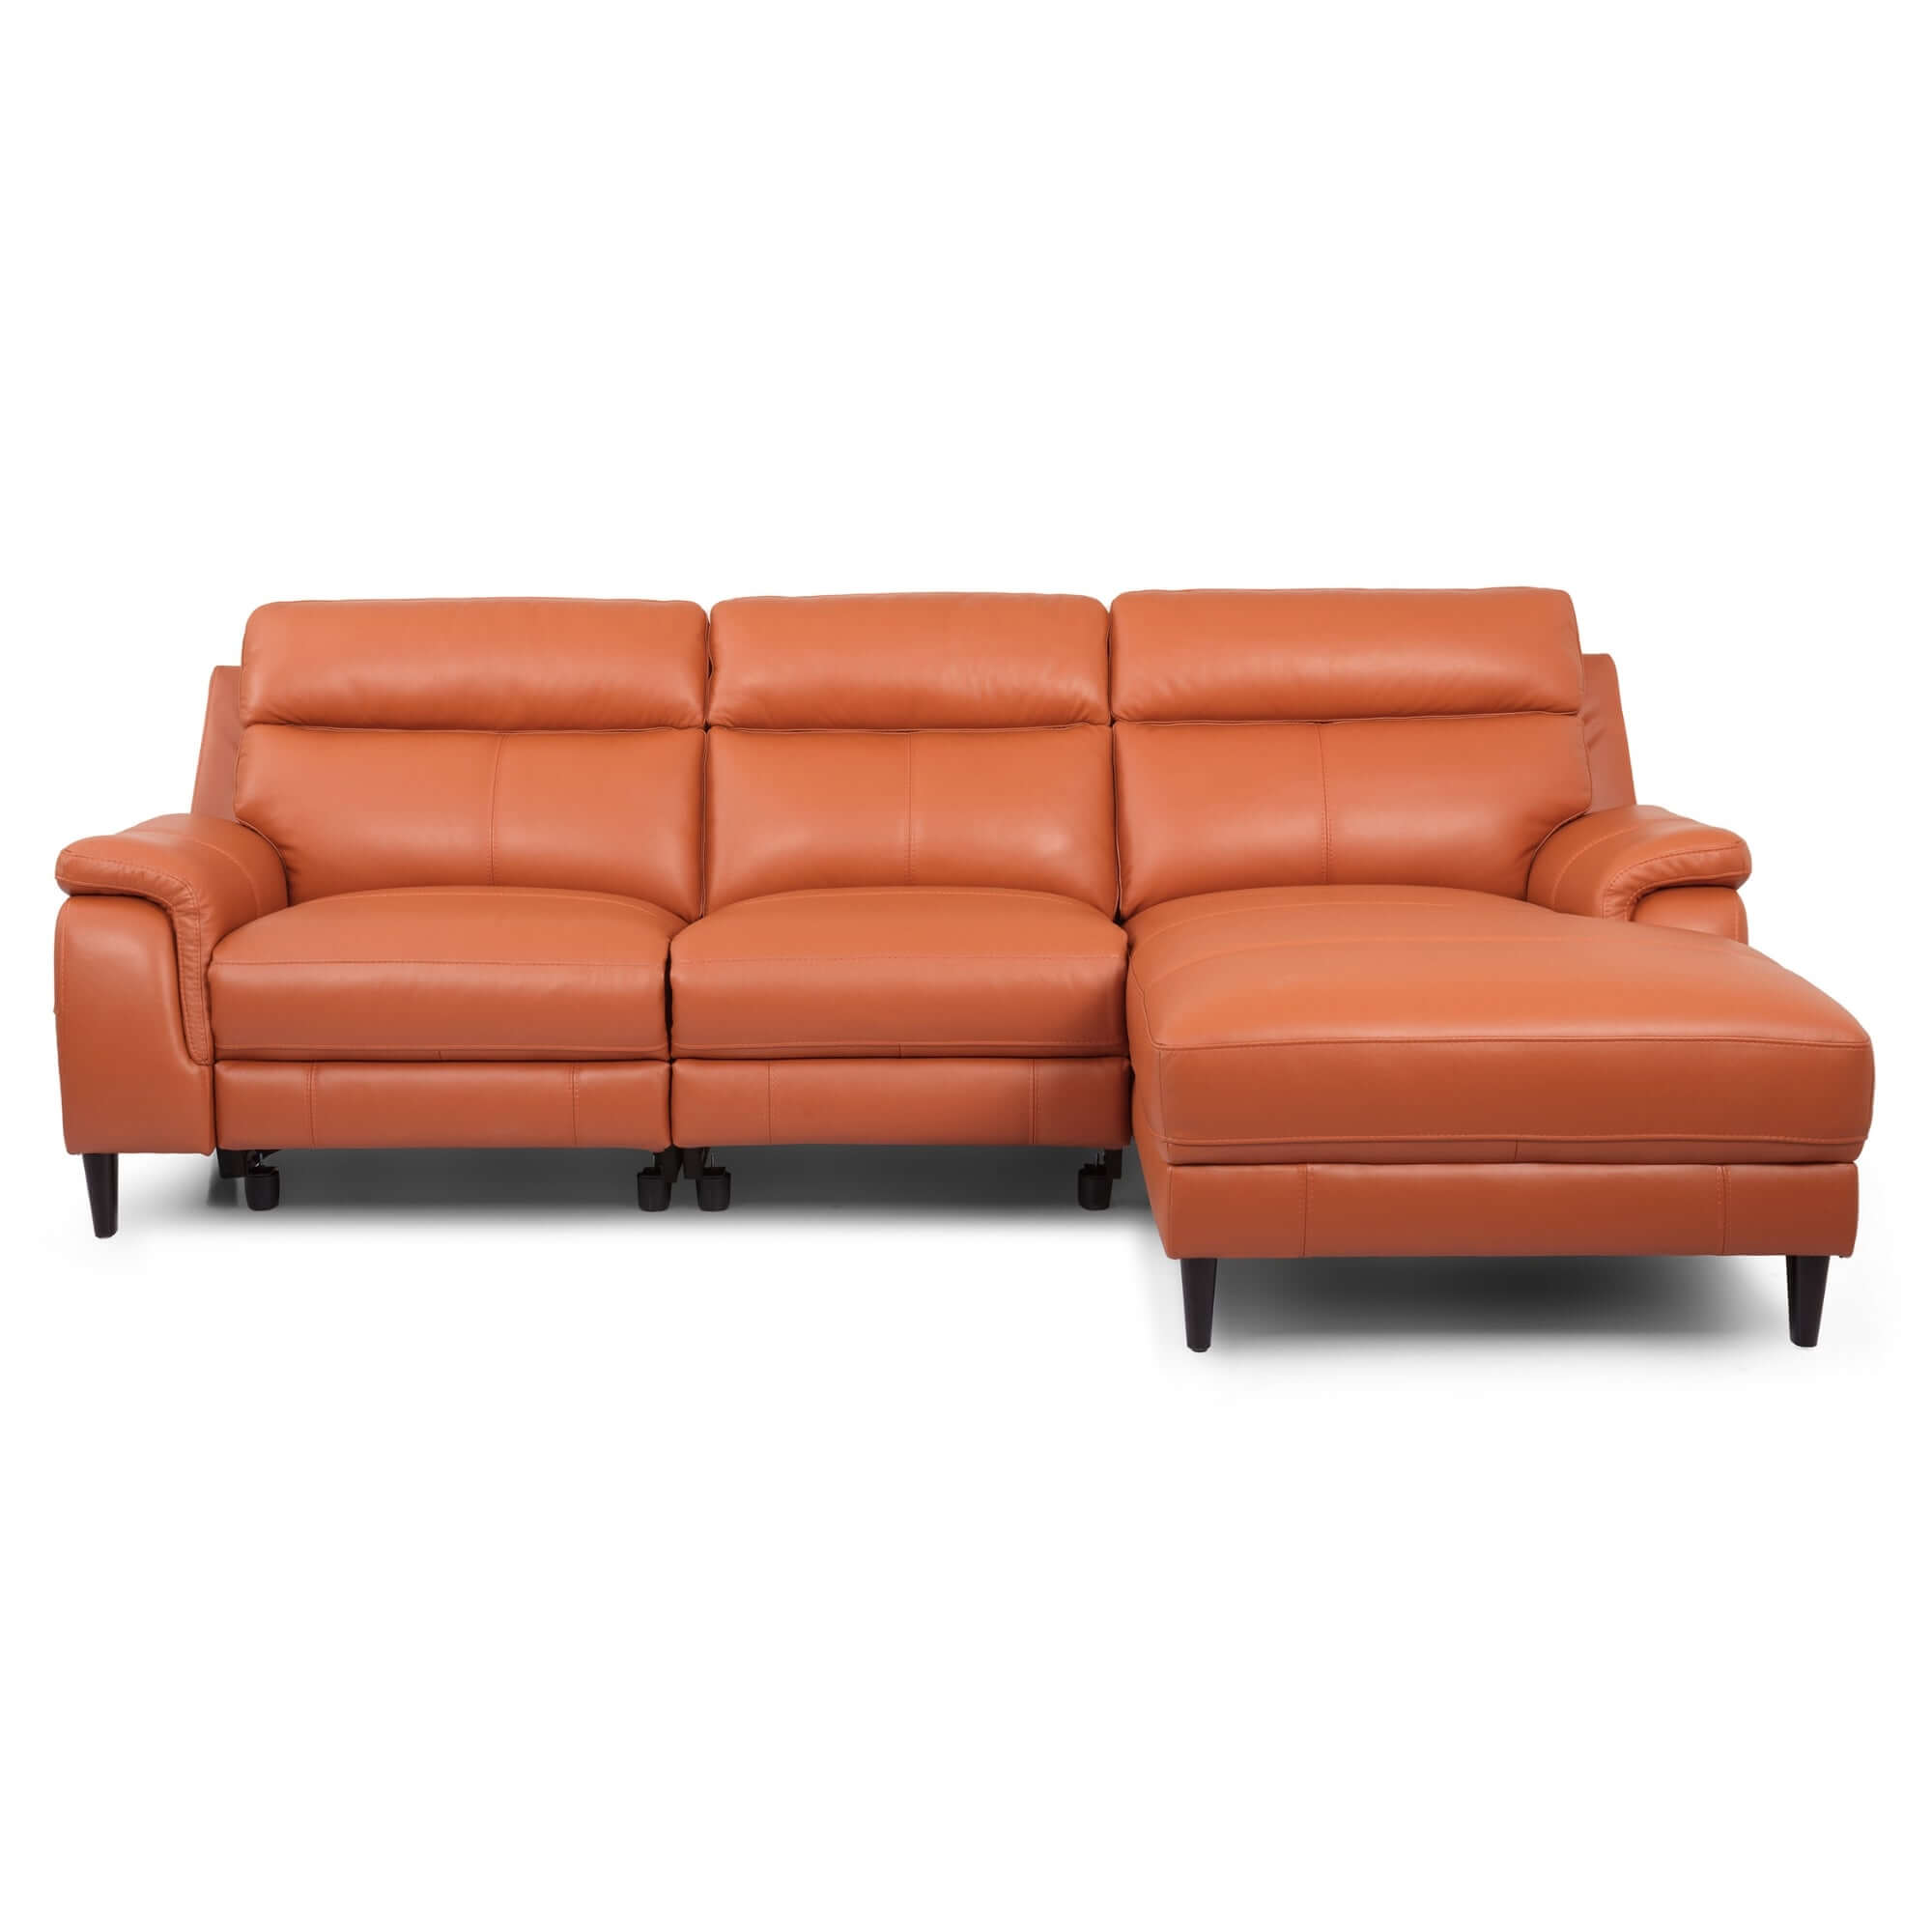 Ella Leather Sofa Recliner with Chaise - Modern Tan Lounge-Upinteriors